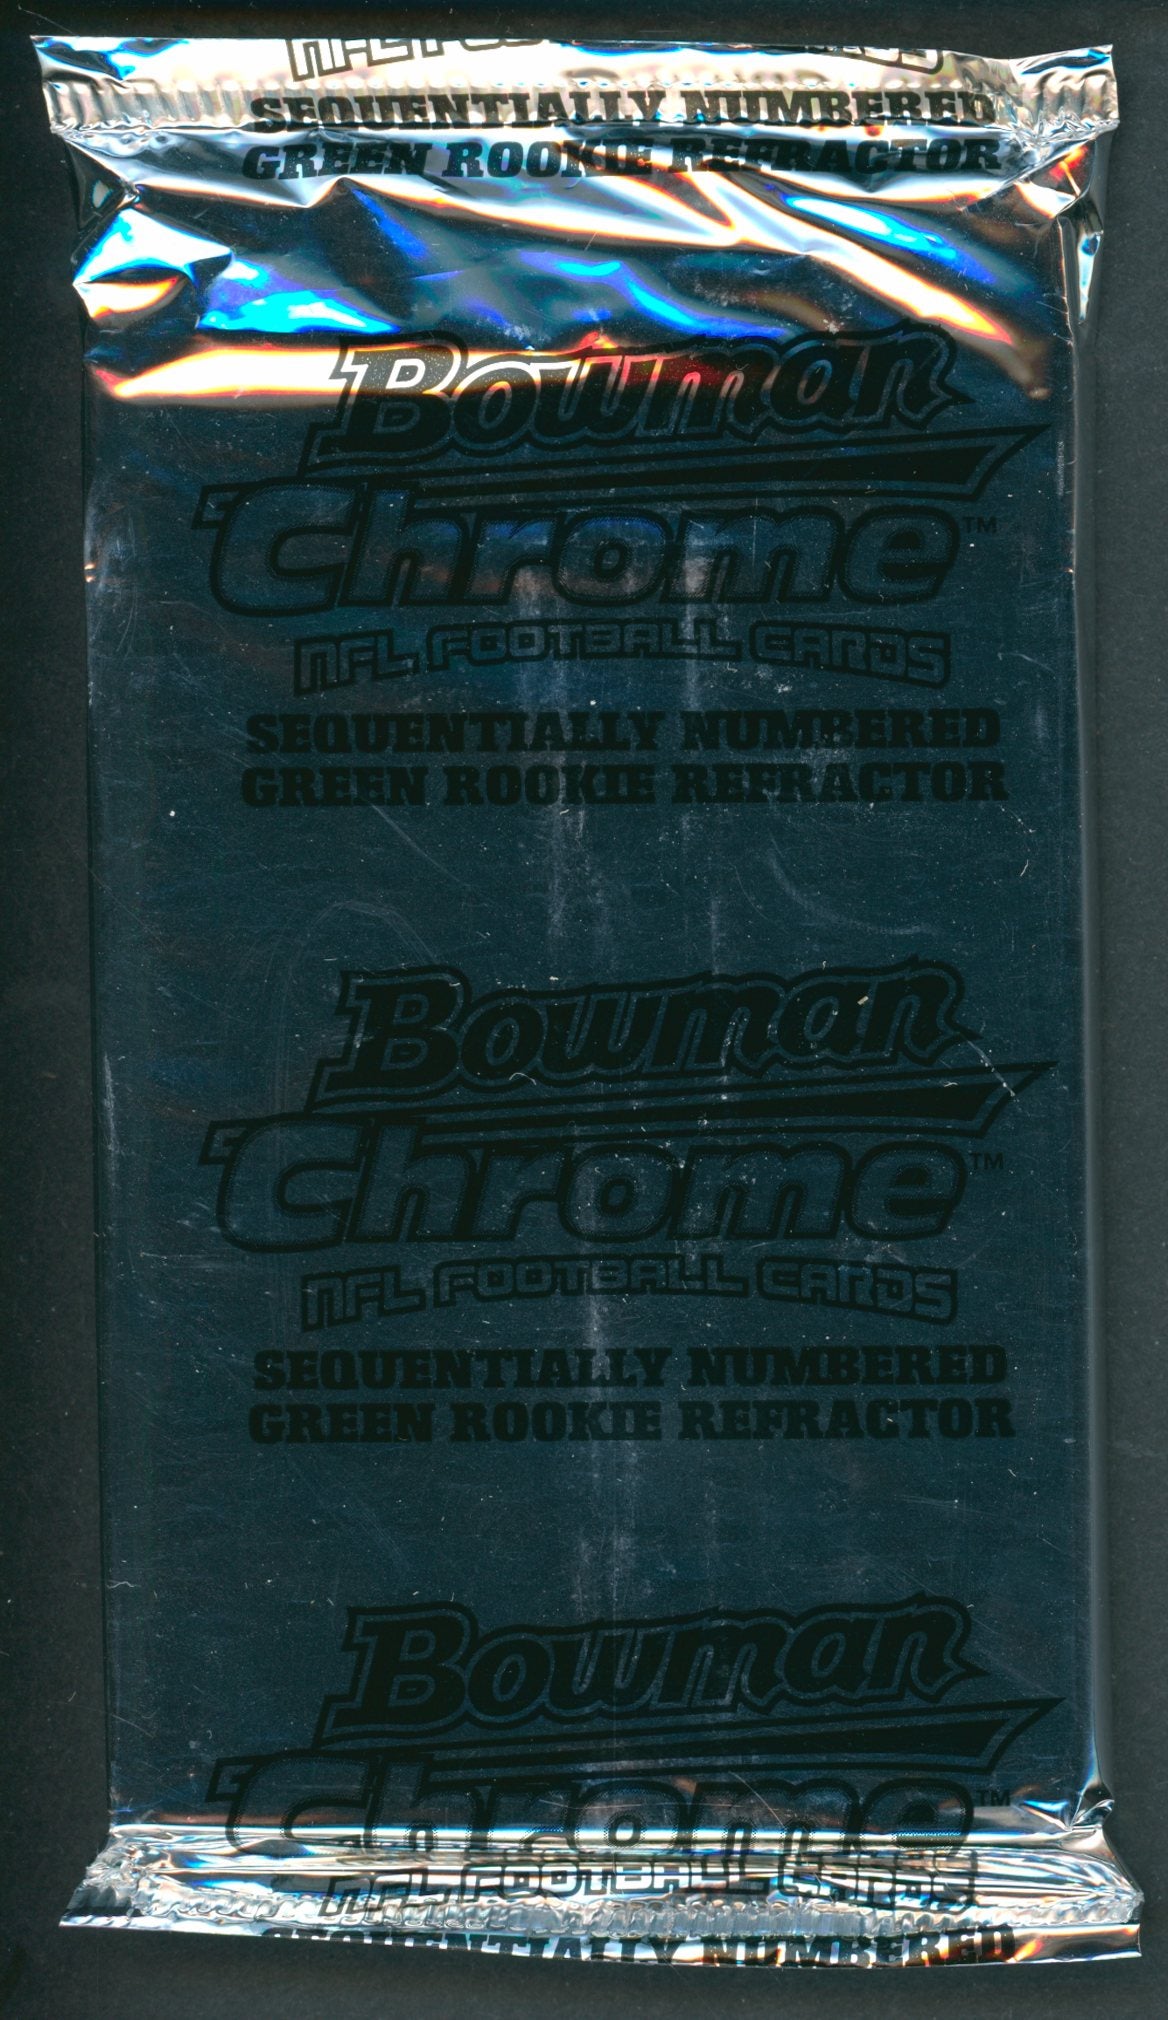 2005 Bowman Chrome Football Green Rookie Refractor Card Unopened Pack